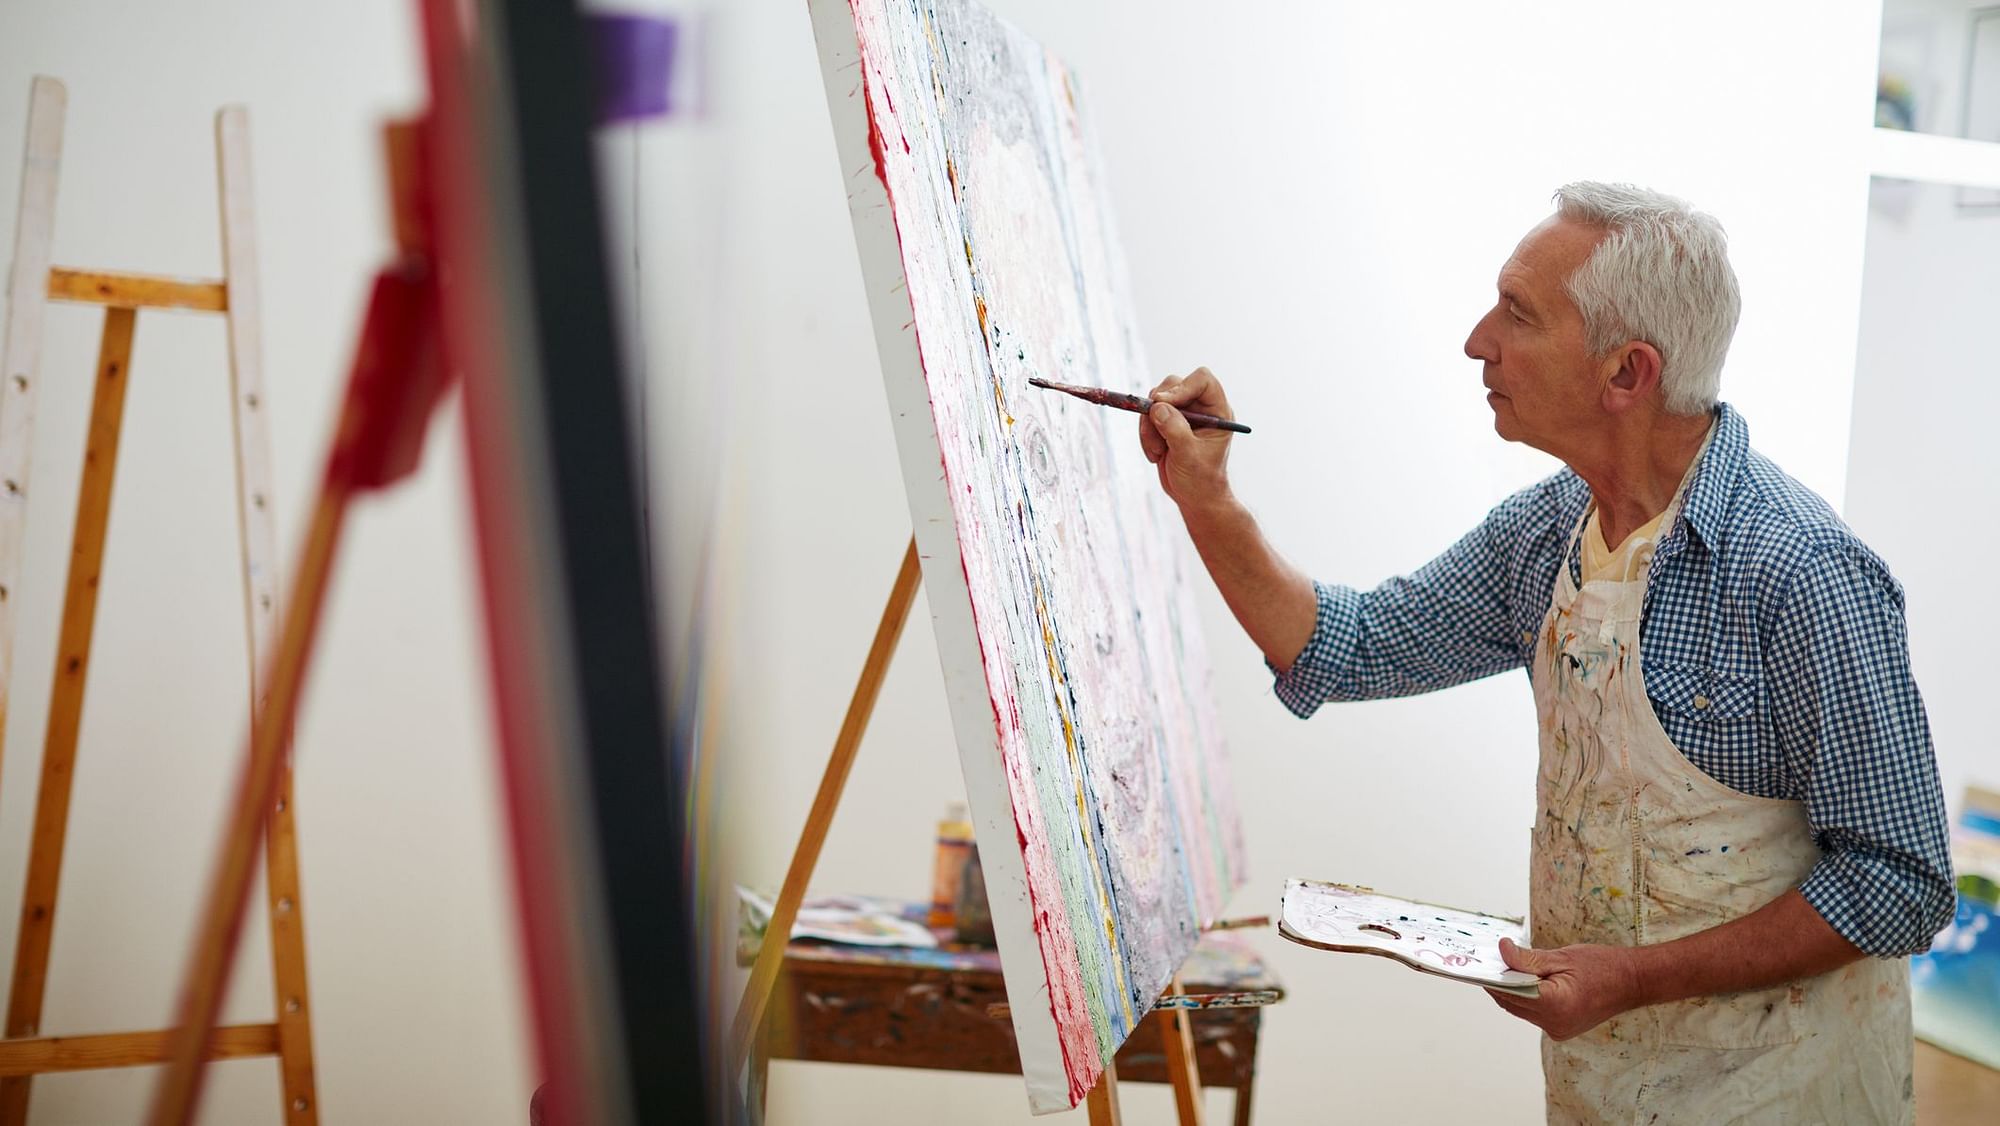 A study has found that older adults could enhance their memory by taking up drawing, even if they are not good at it.